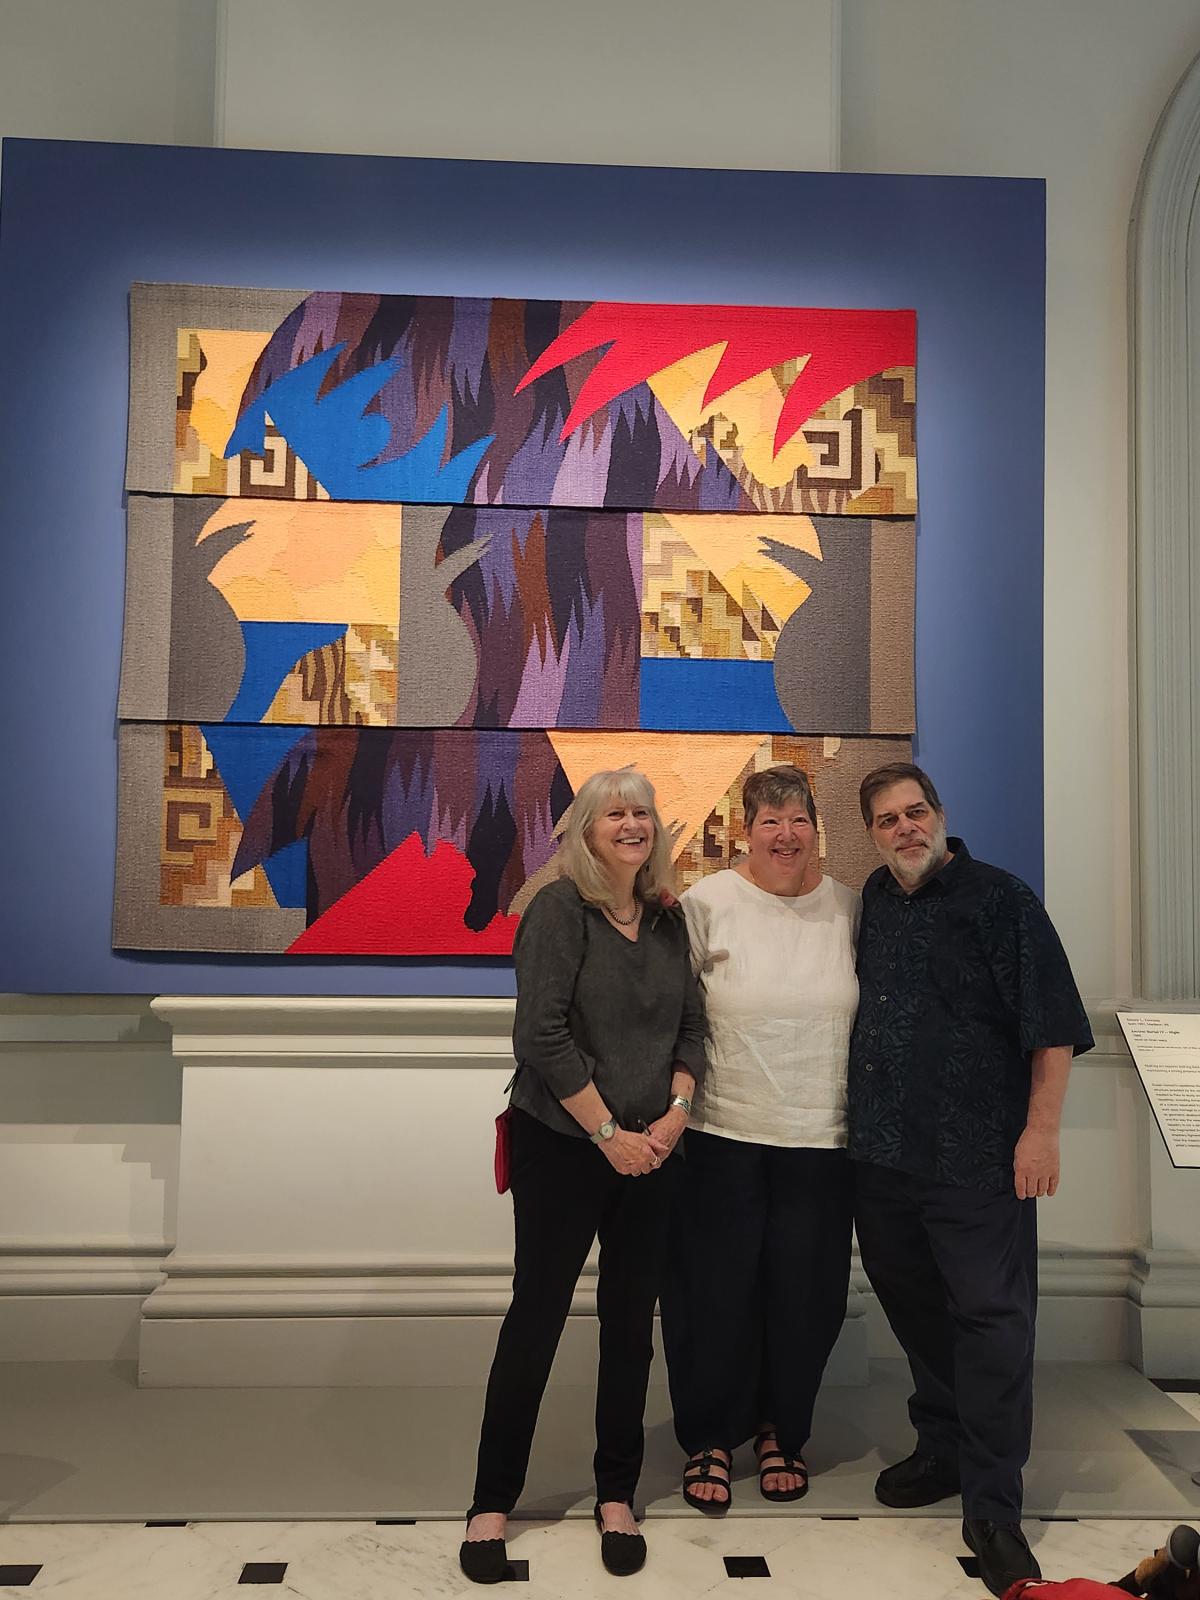 Two women and a man pose for a photo in front of an abstract artwork that hangs on a blue wall.